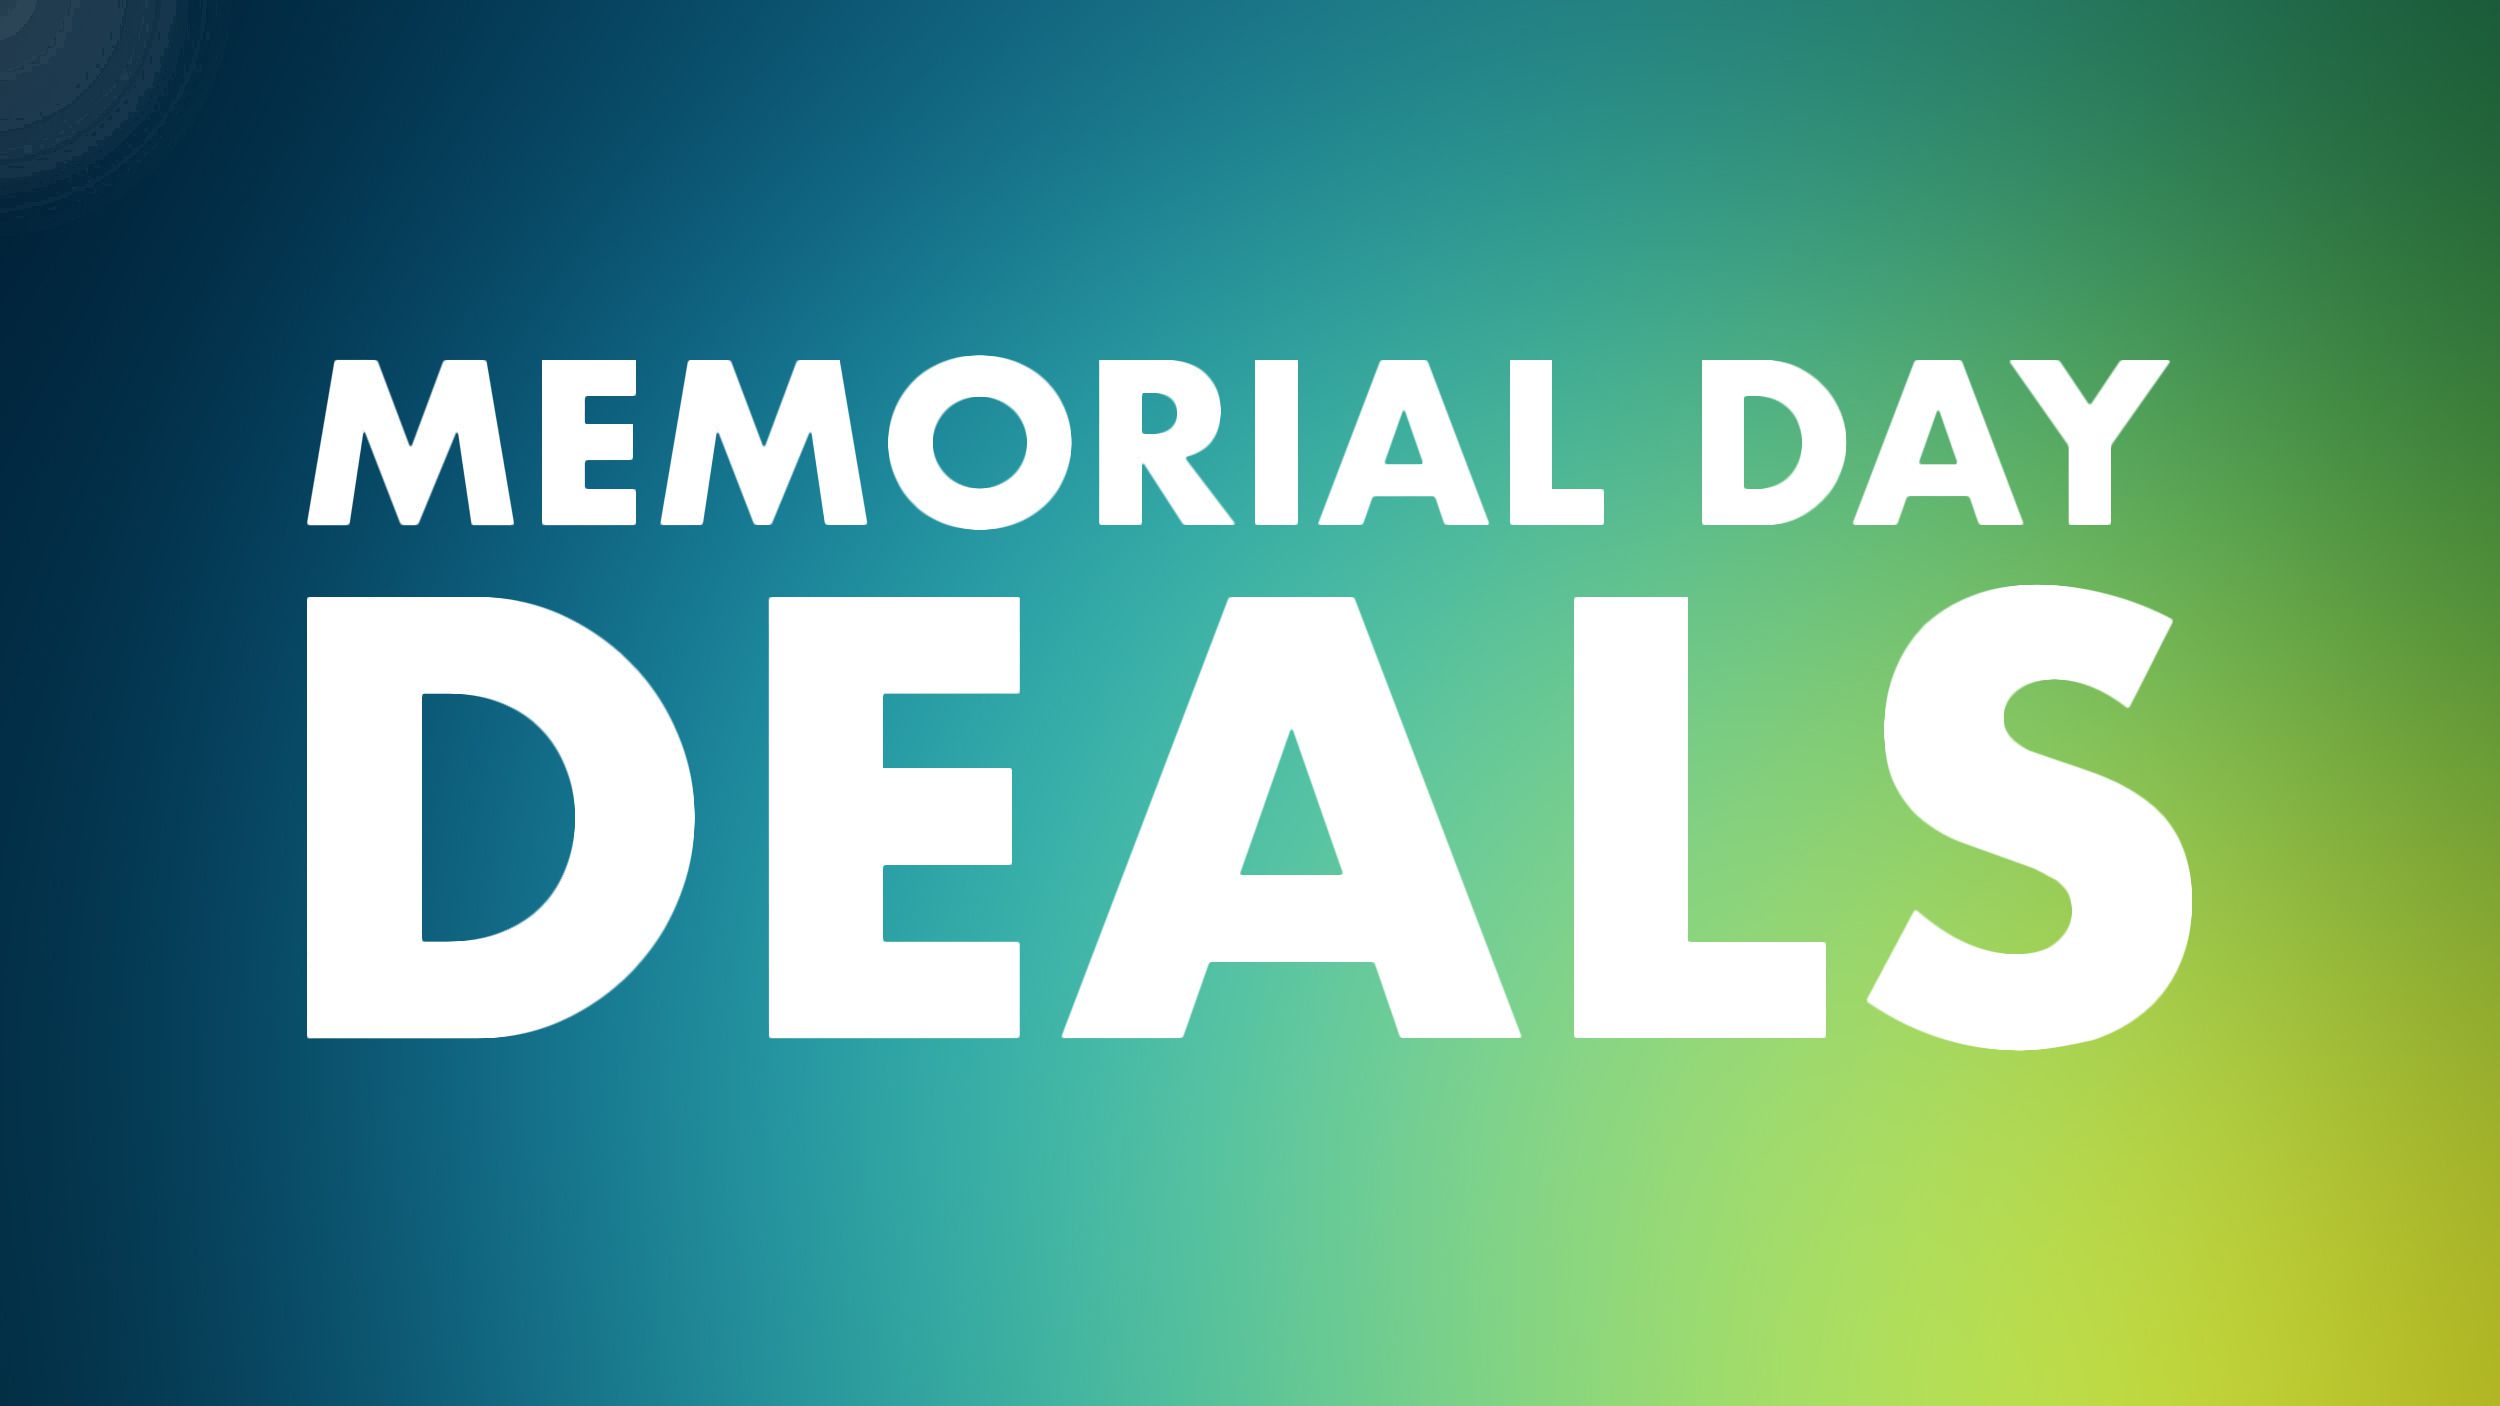 The Best Memorial Day Deals on Apple Products Including AirPods, MacBook Pro, and More